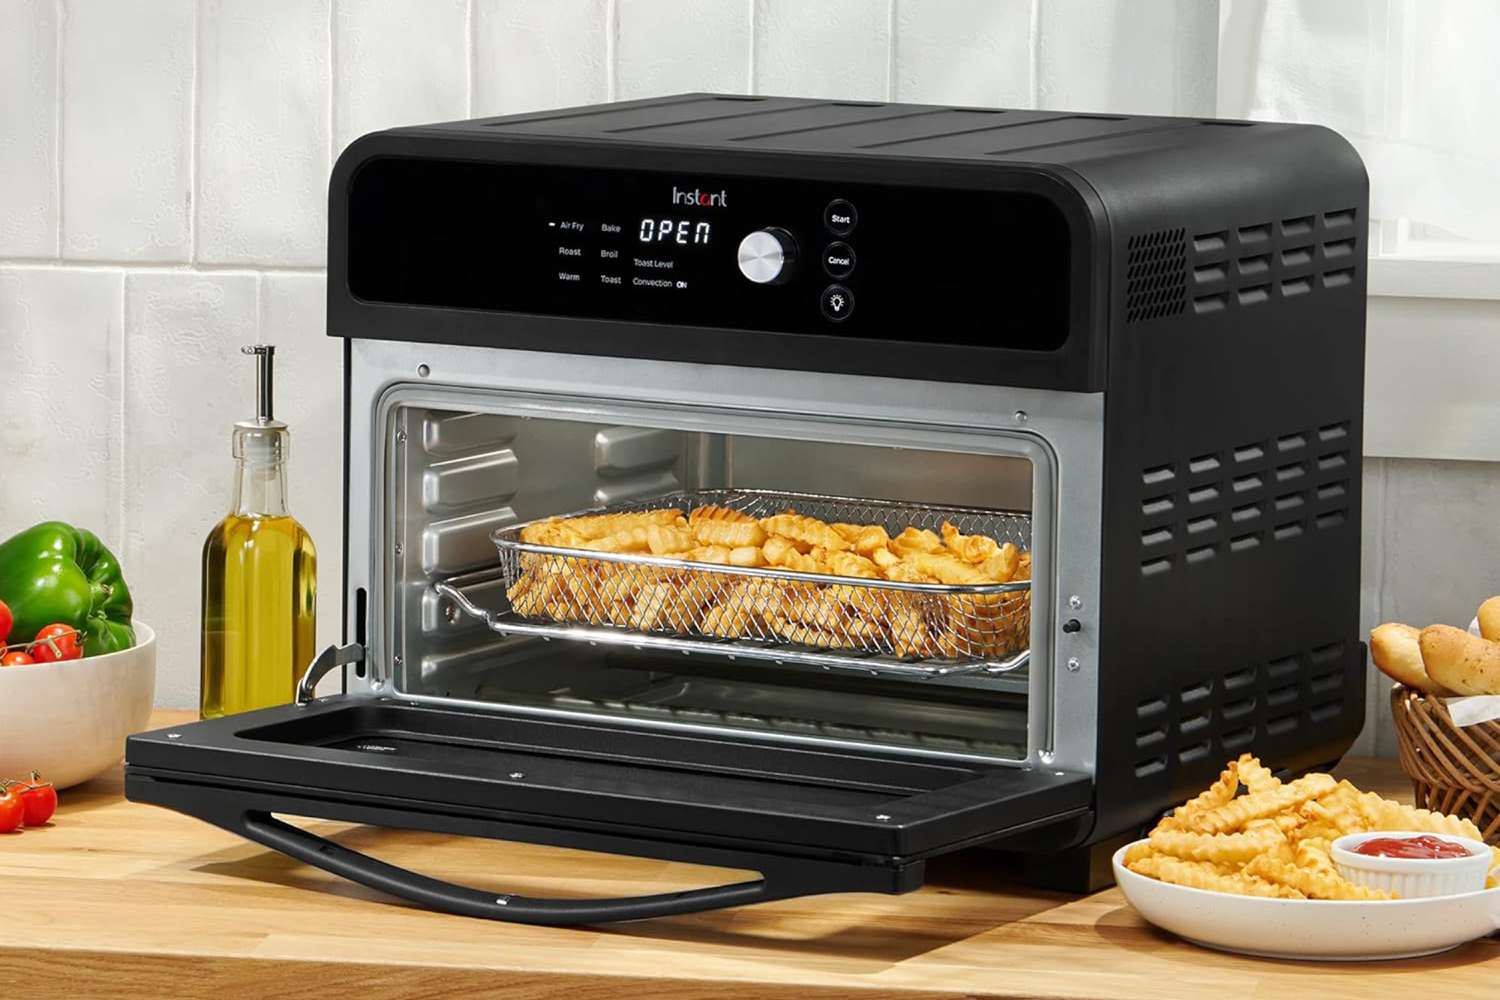 6 Air Fryer Toaster Oven Deals From Ninja, Cuisinart, and More at Amazon [Video]